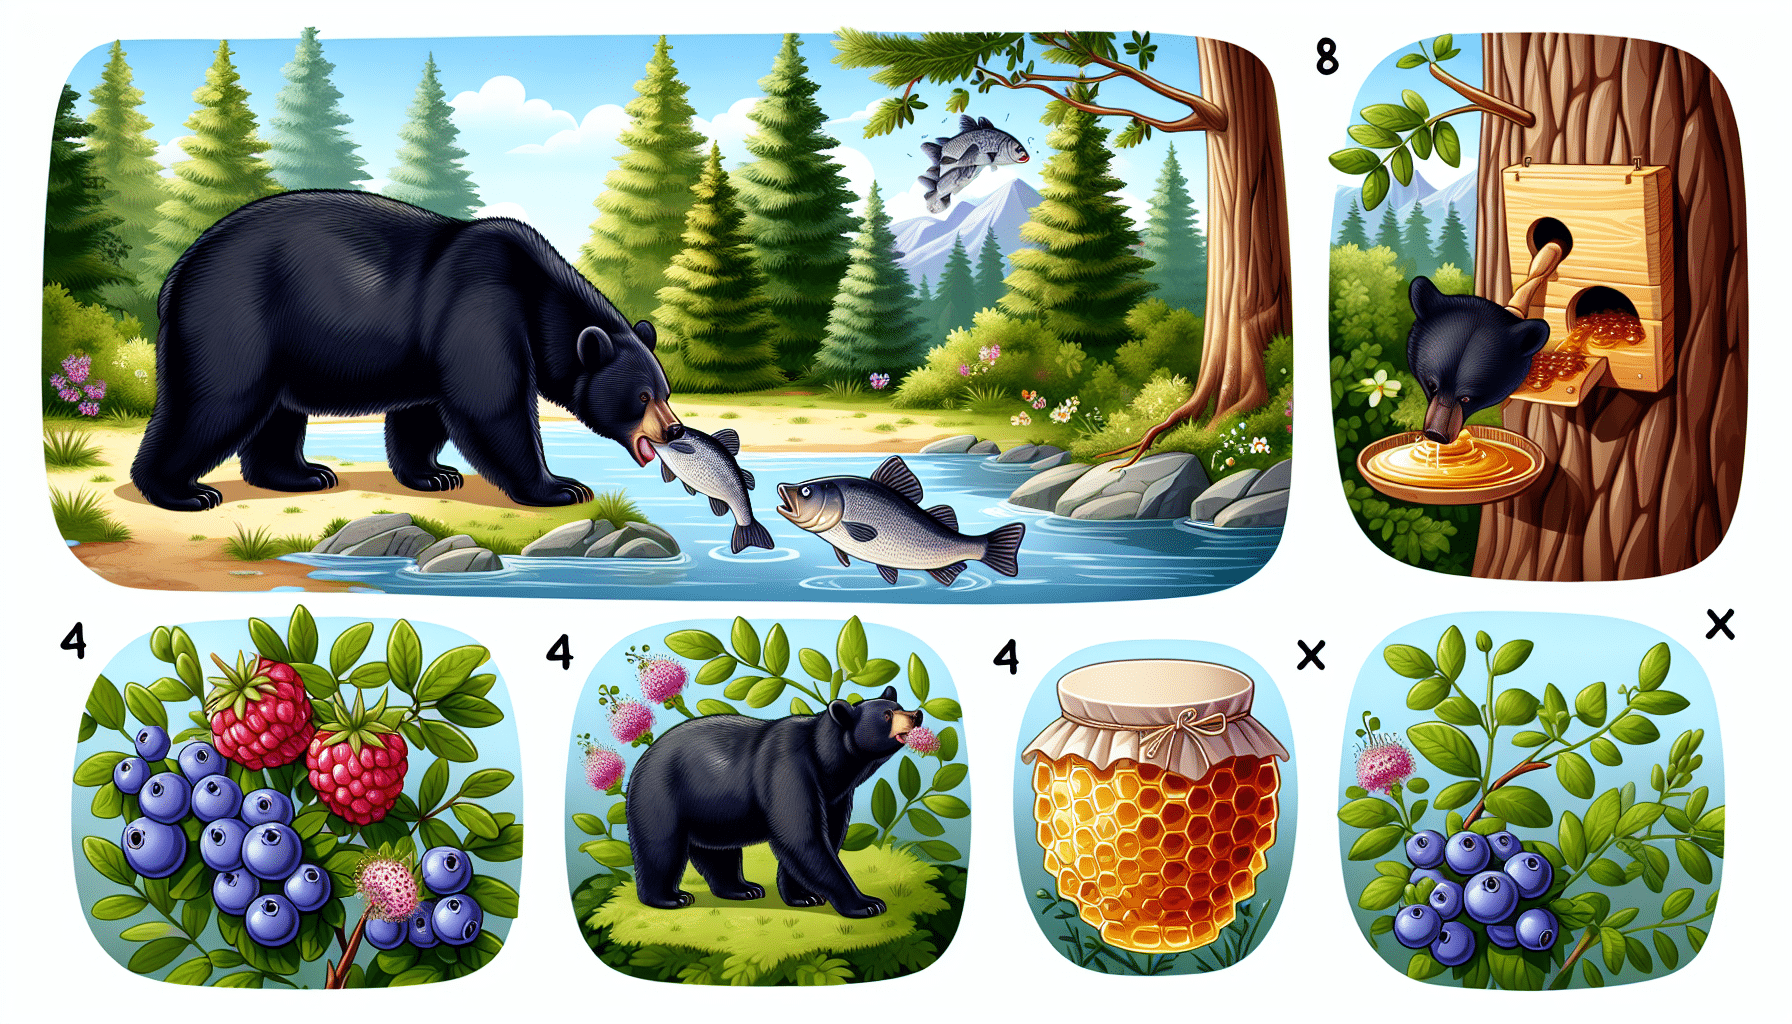 A woodland scene showcasing various types of food that black bears typically eat. In one area of the scene, depict a black bear near a river, catching a fish with its mouth. Nearby, show a blueberry bush with ripe berries that the bear could also eat. In another part of the scene, separate from the other bear, show a different black bear smelling a honeycomb from a beehive located in a tree. The overall scene should not include any text or people, and should portray only the black bears and their natural habitats with typical food sources.